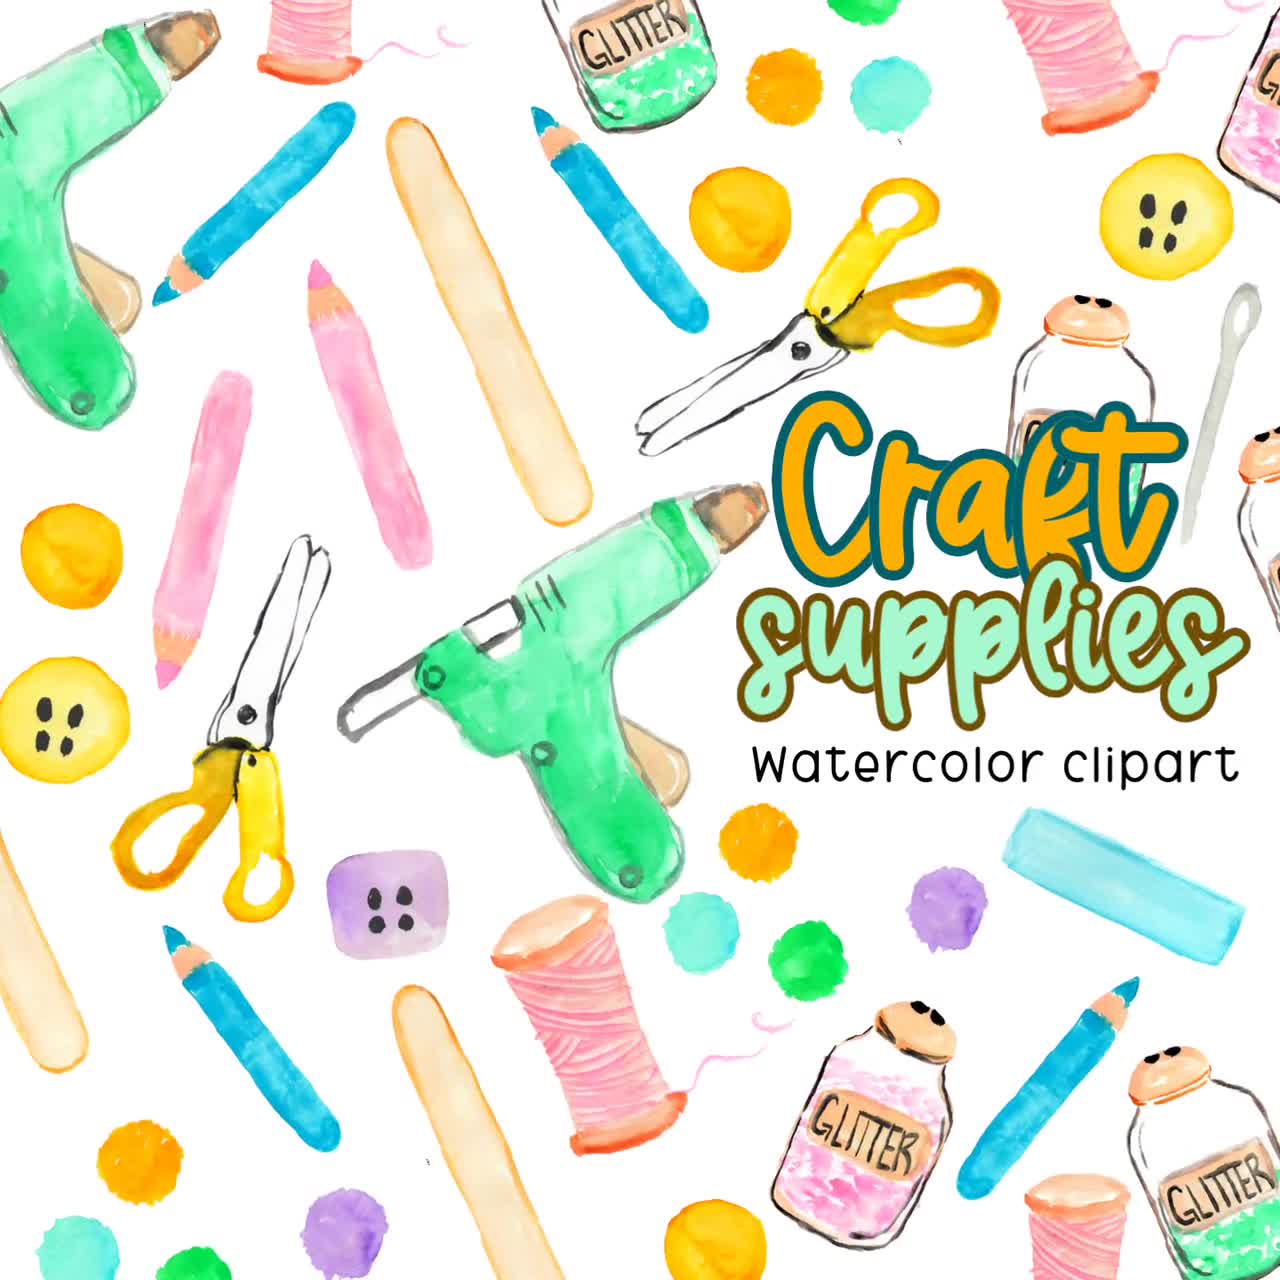 Crafting Supplies Clipart Collection – TWG Designs